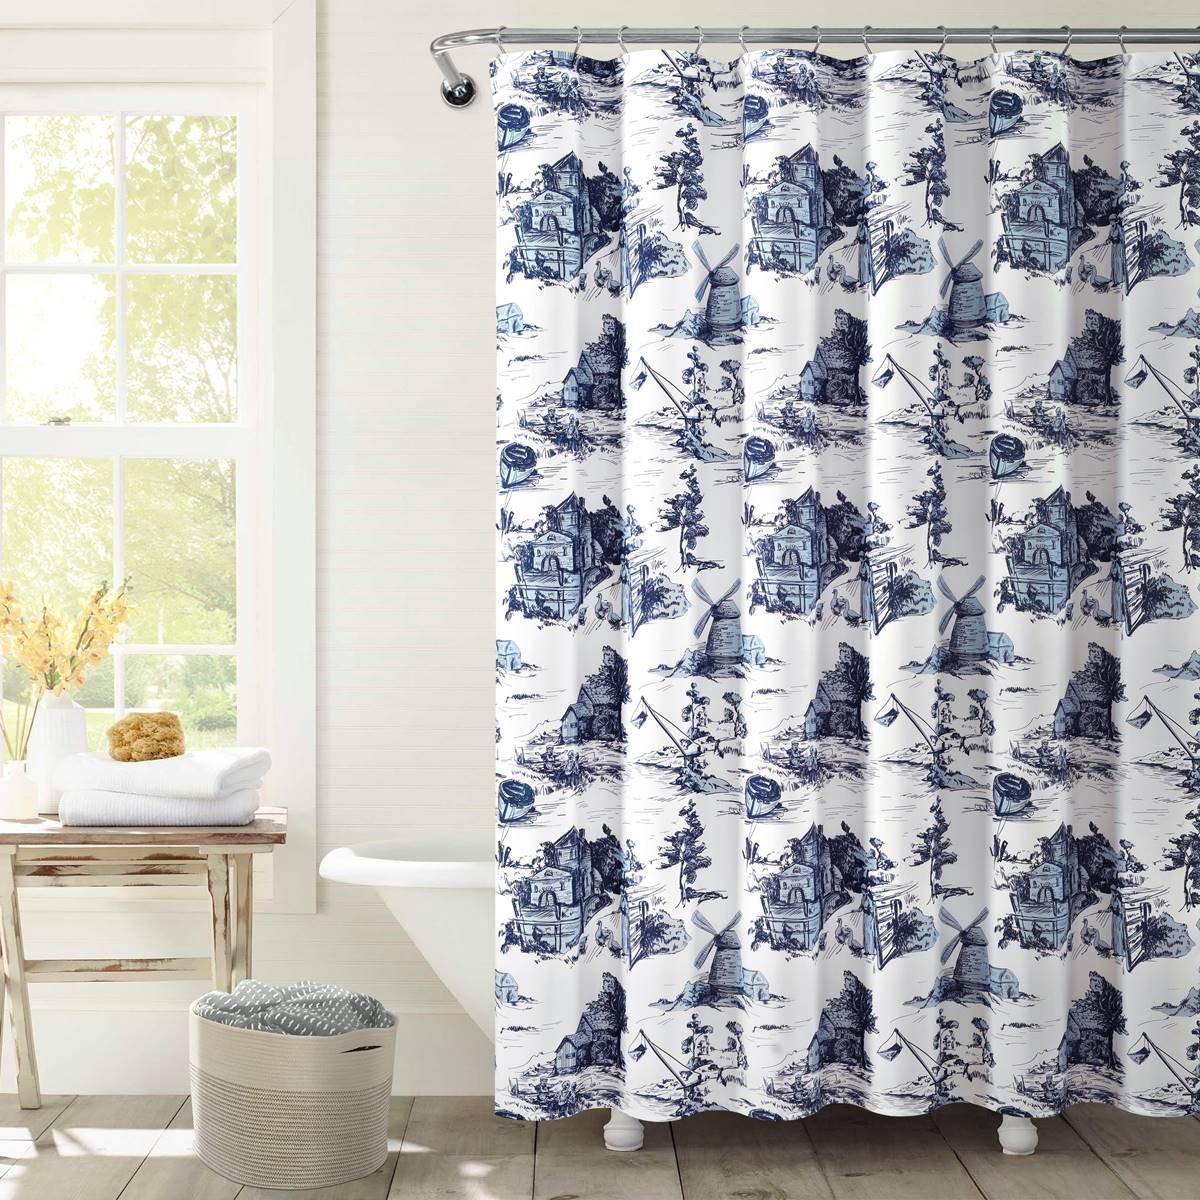 Lush Decor(R) French Country Toile Shower Curtain